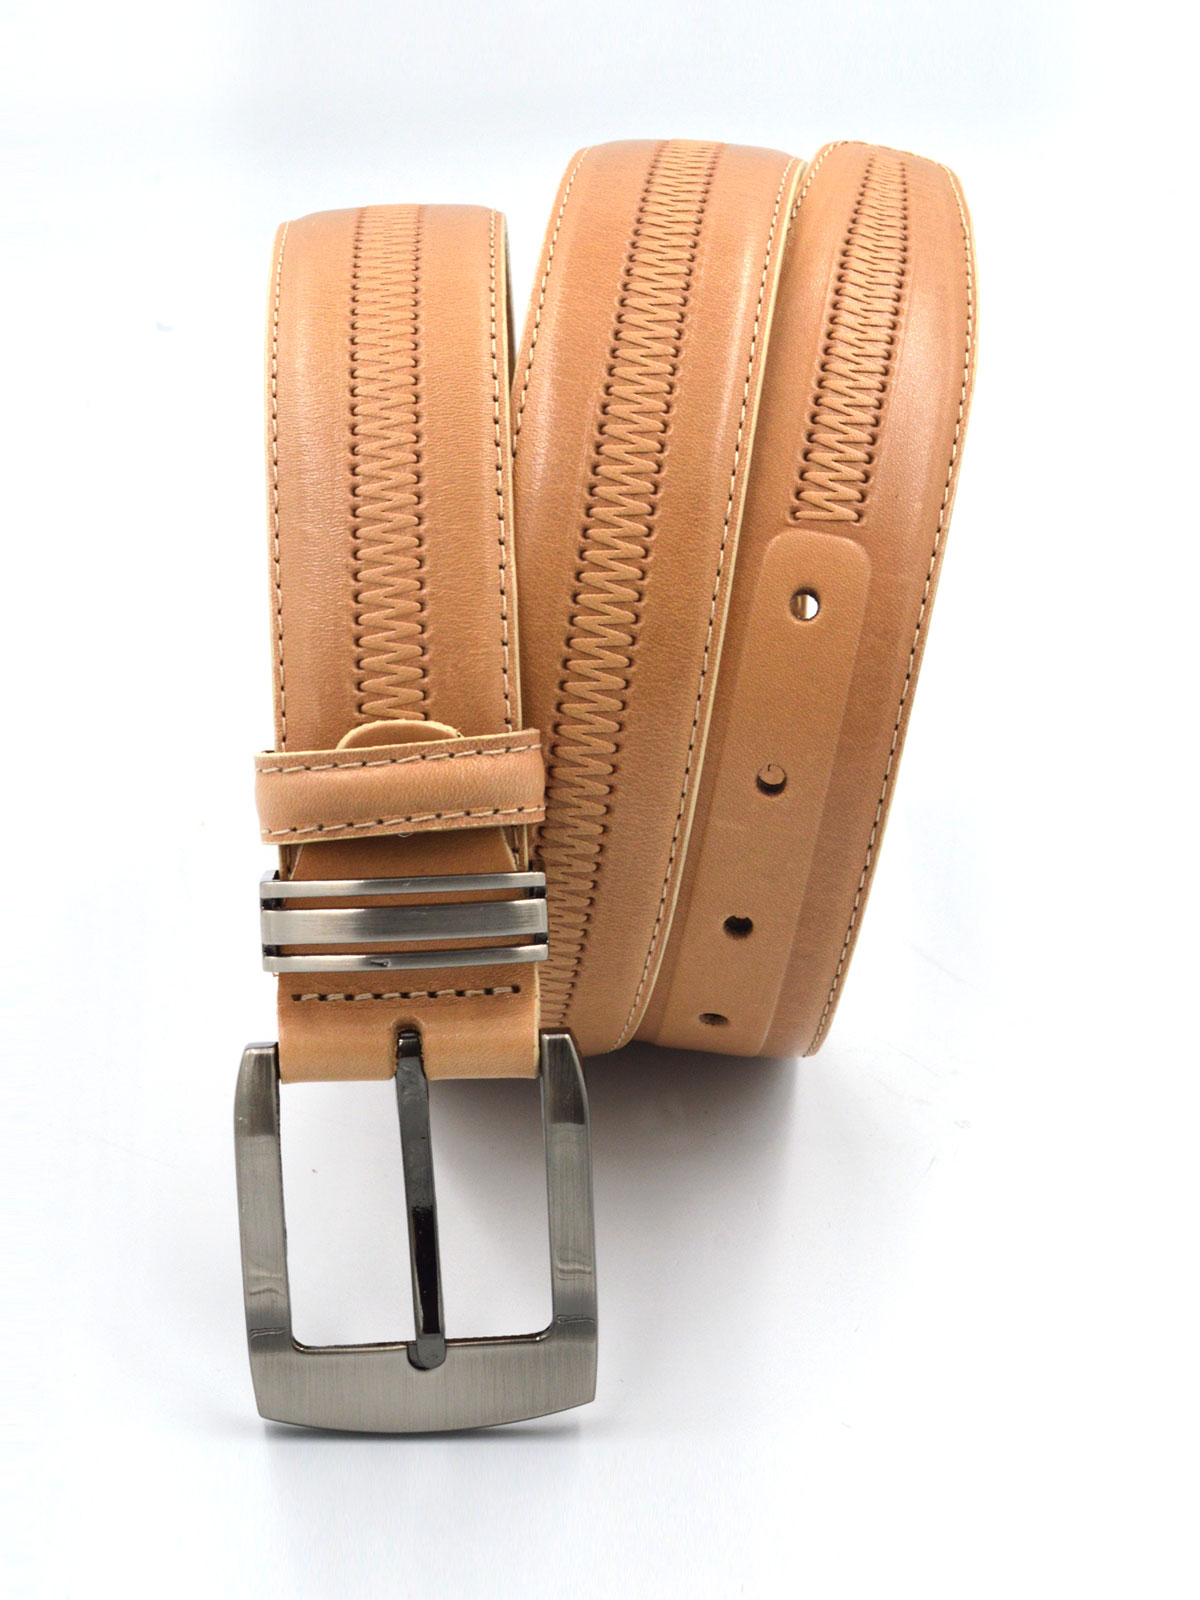 Mens belt in beige with a buckle - 10454 - € 24.75 img2